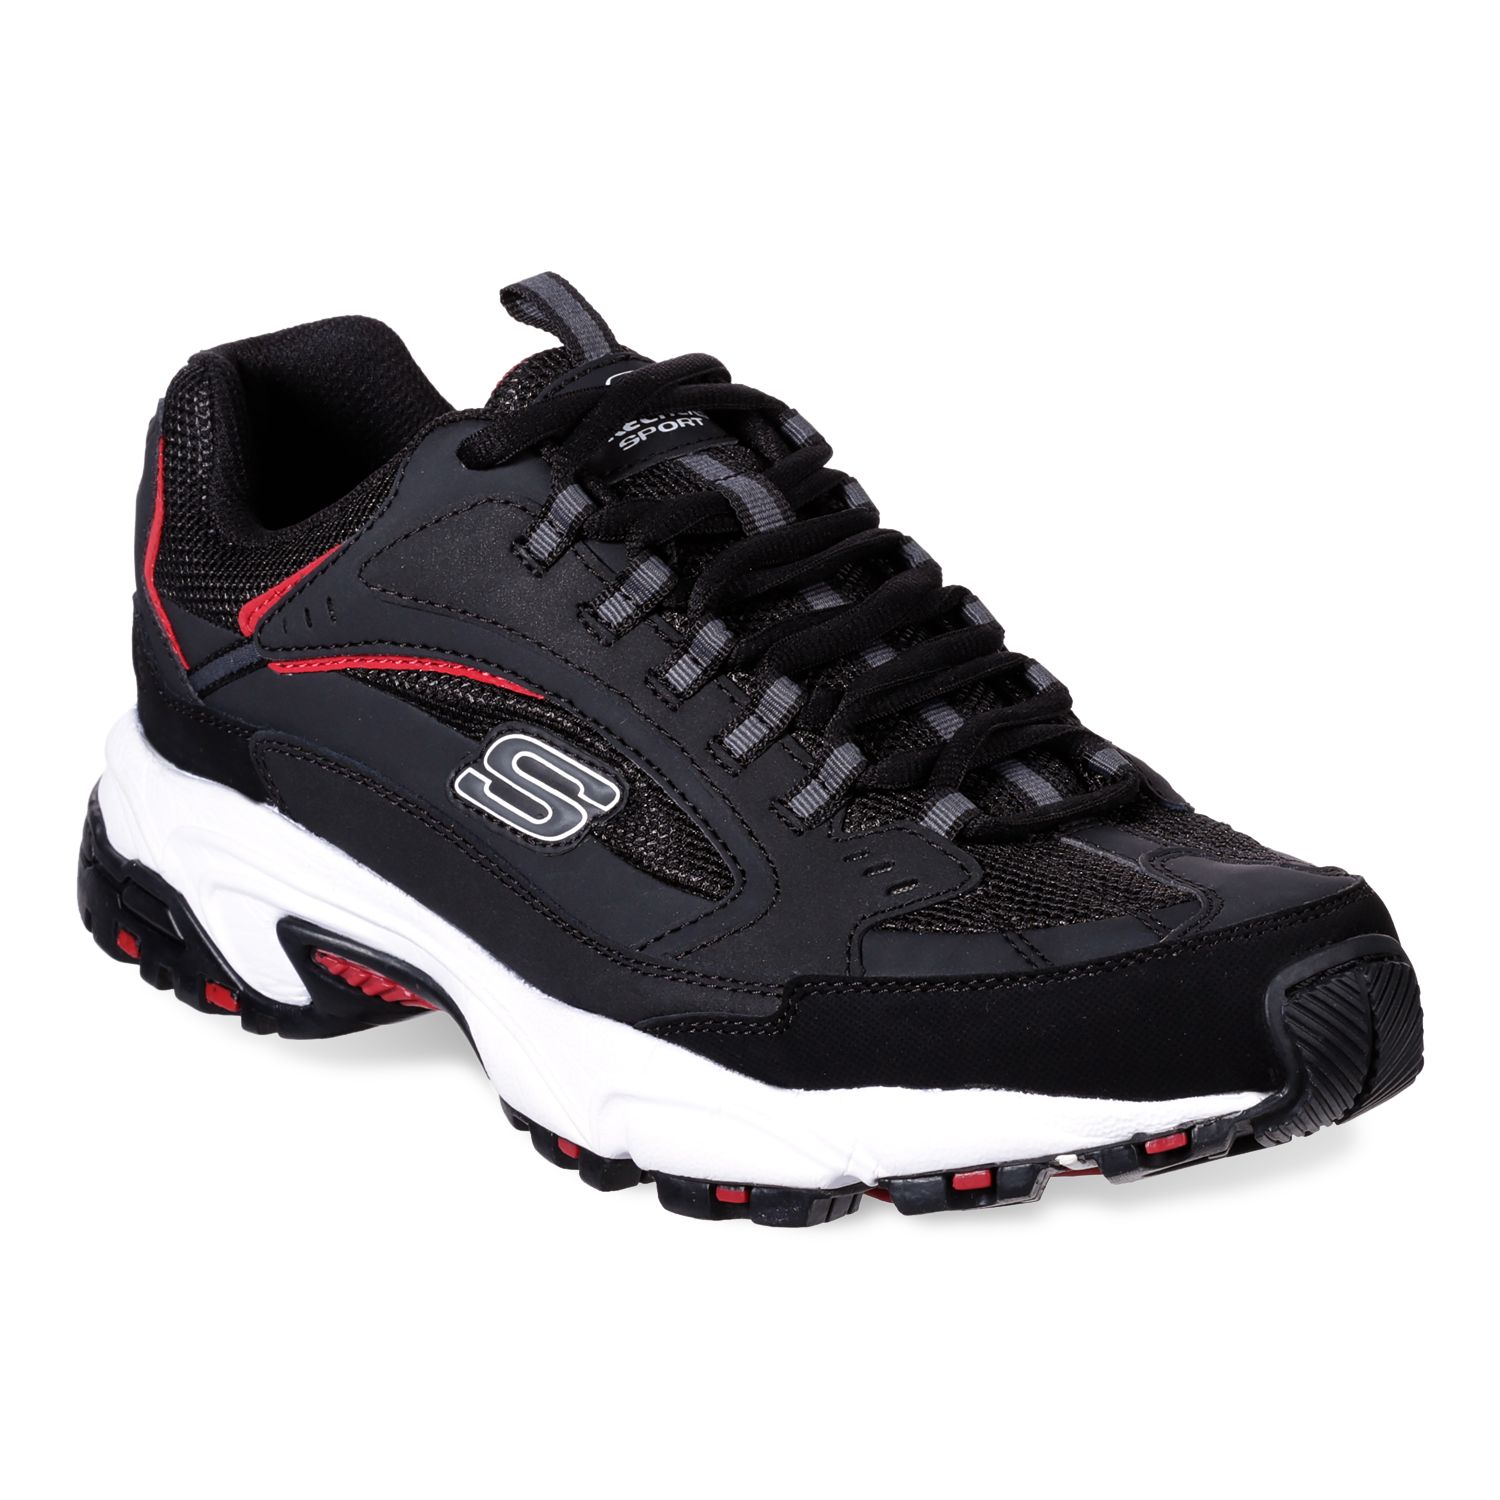 red skechers womens shoes